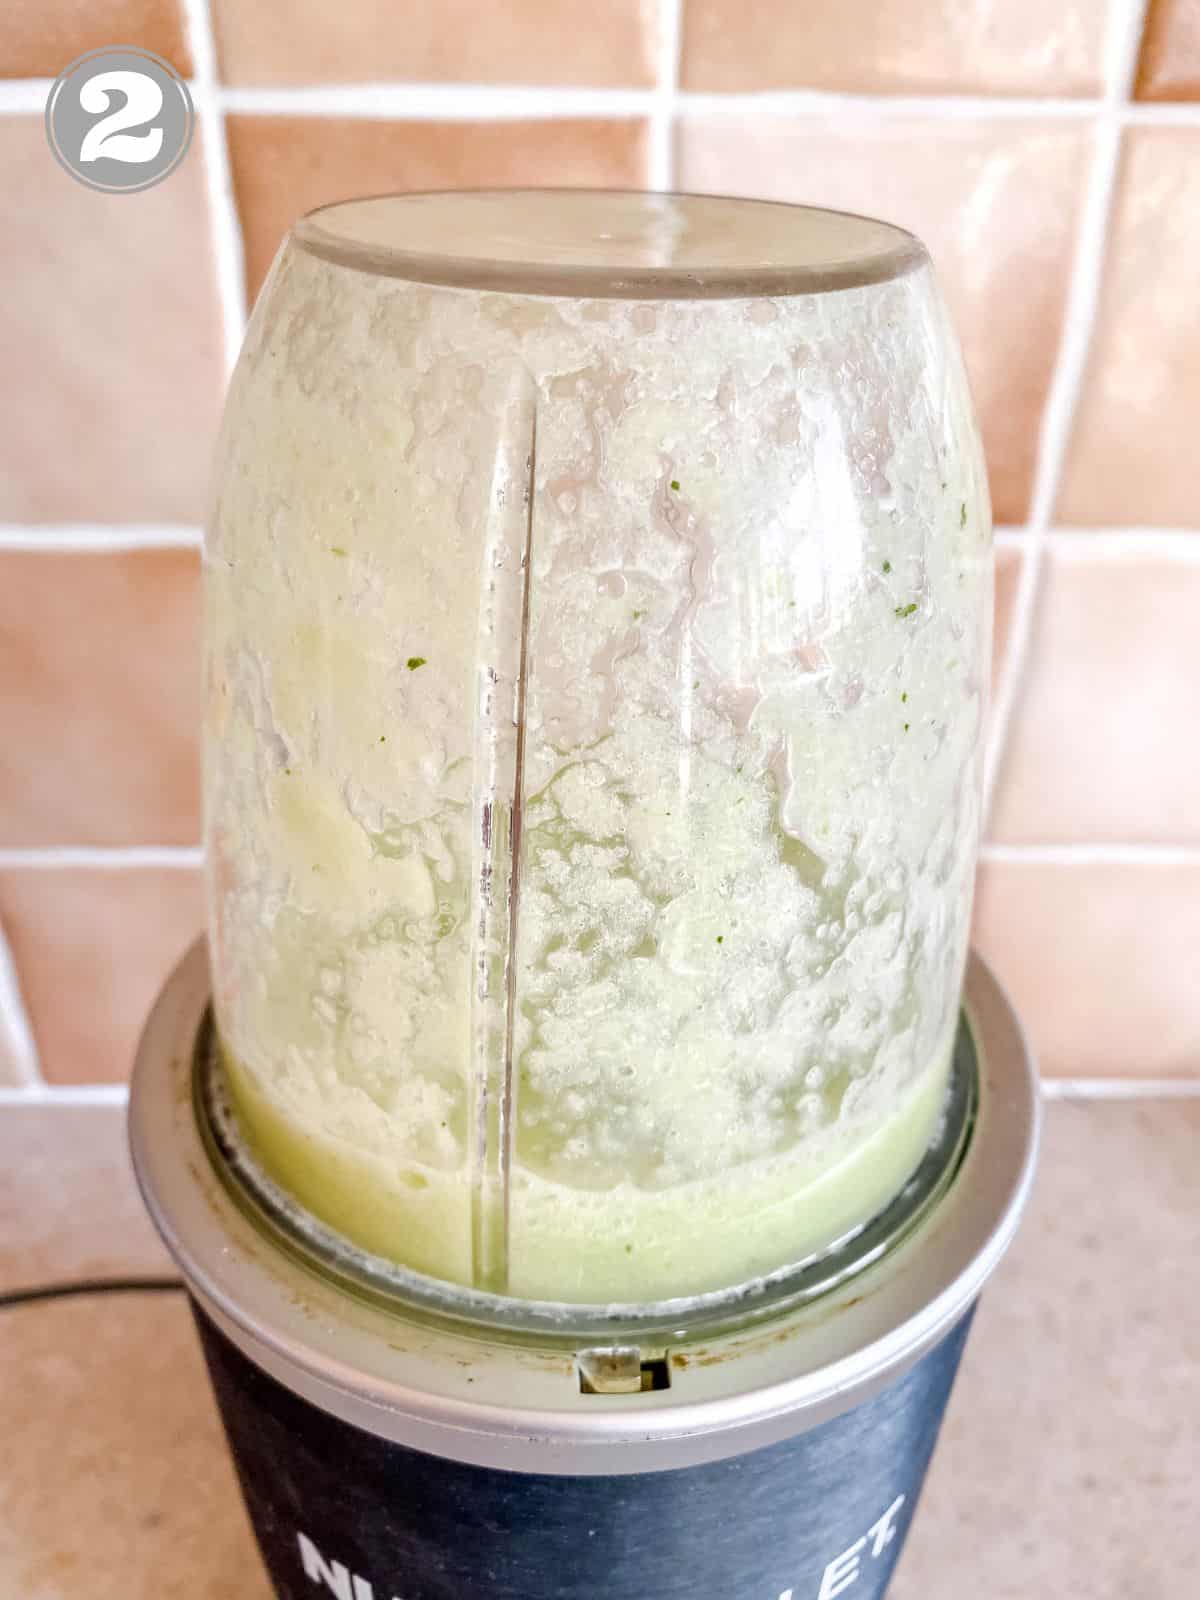 cucumber and mint in a blender against a brown tiled wall with number one in the corner.